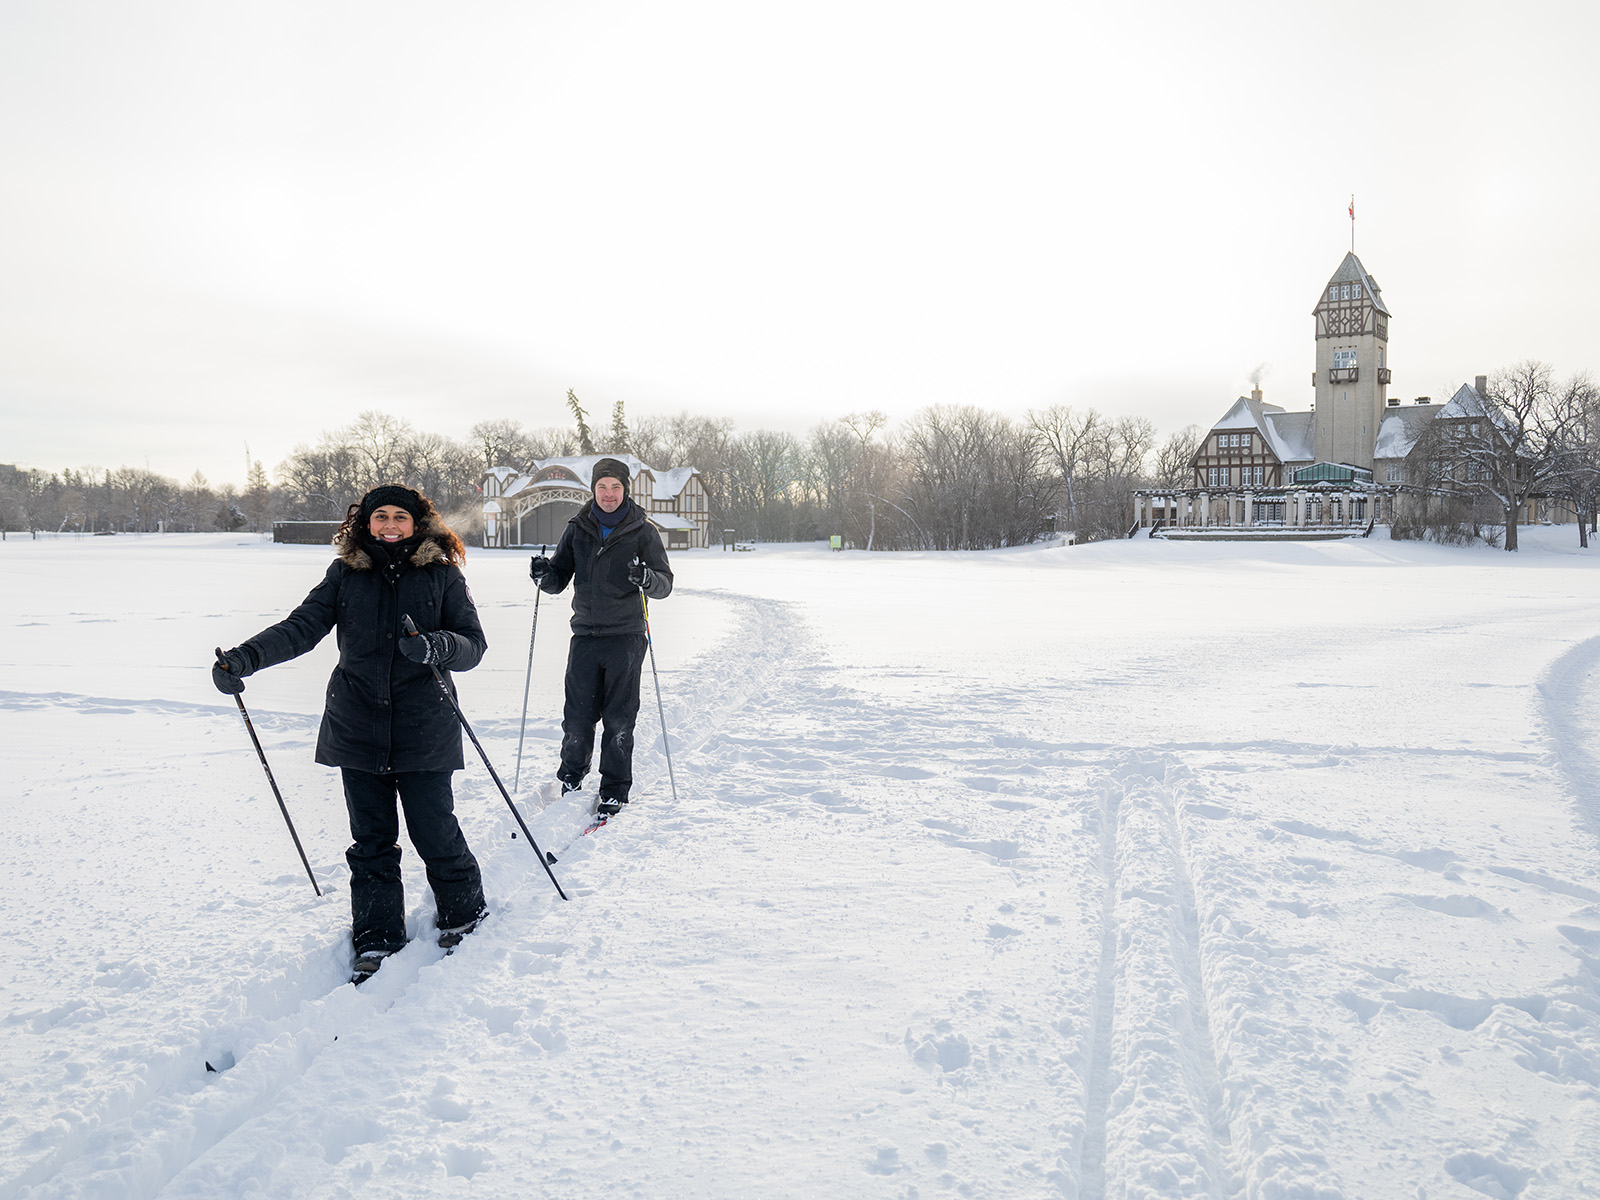 two people cross country ski in a field in front of the Lyric Theatre